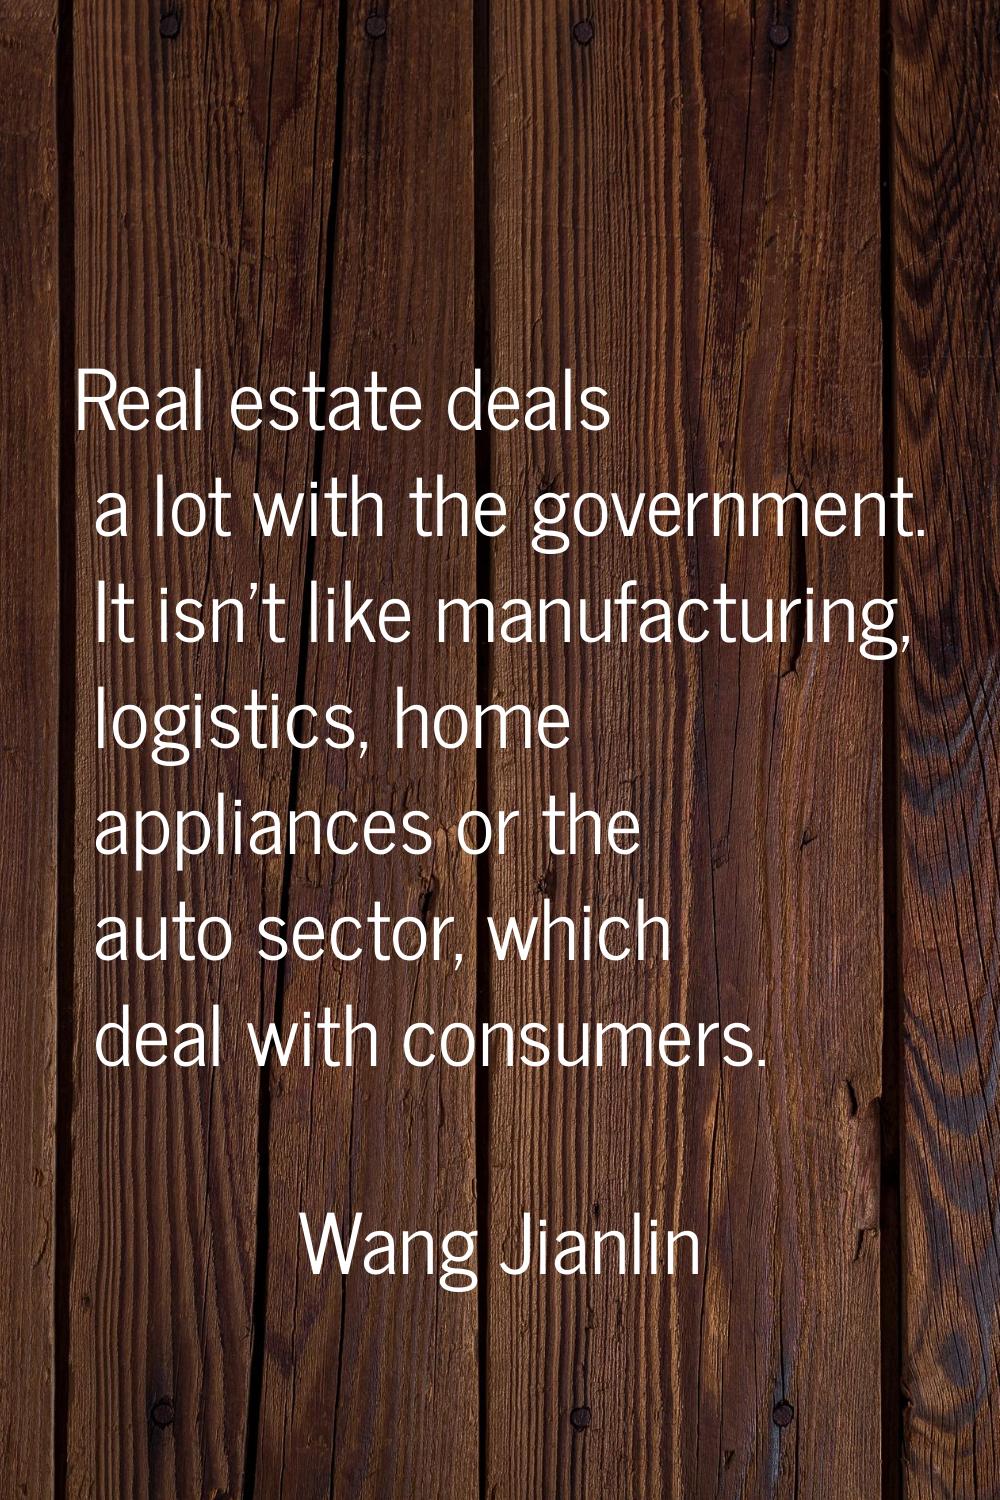 Real estate deals a lot with the government. It isn't like manufacturing, logistics, home appliance